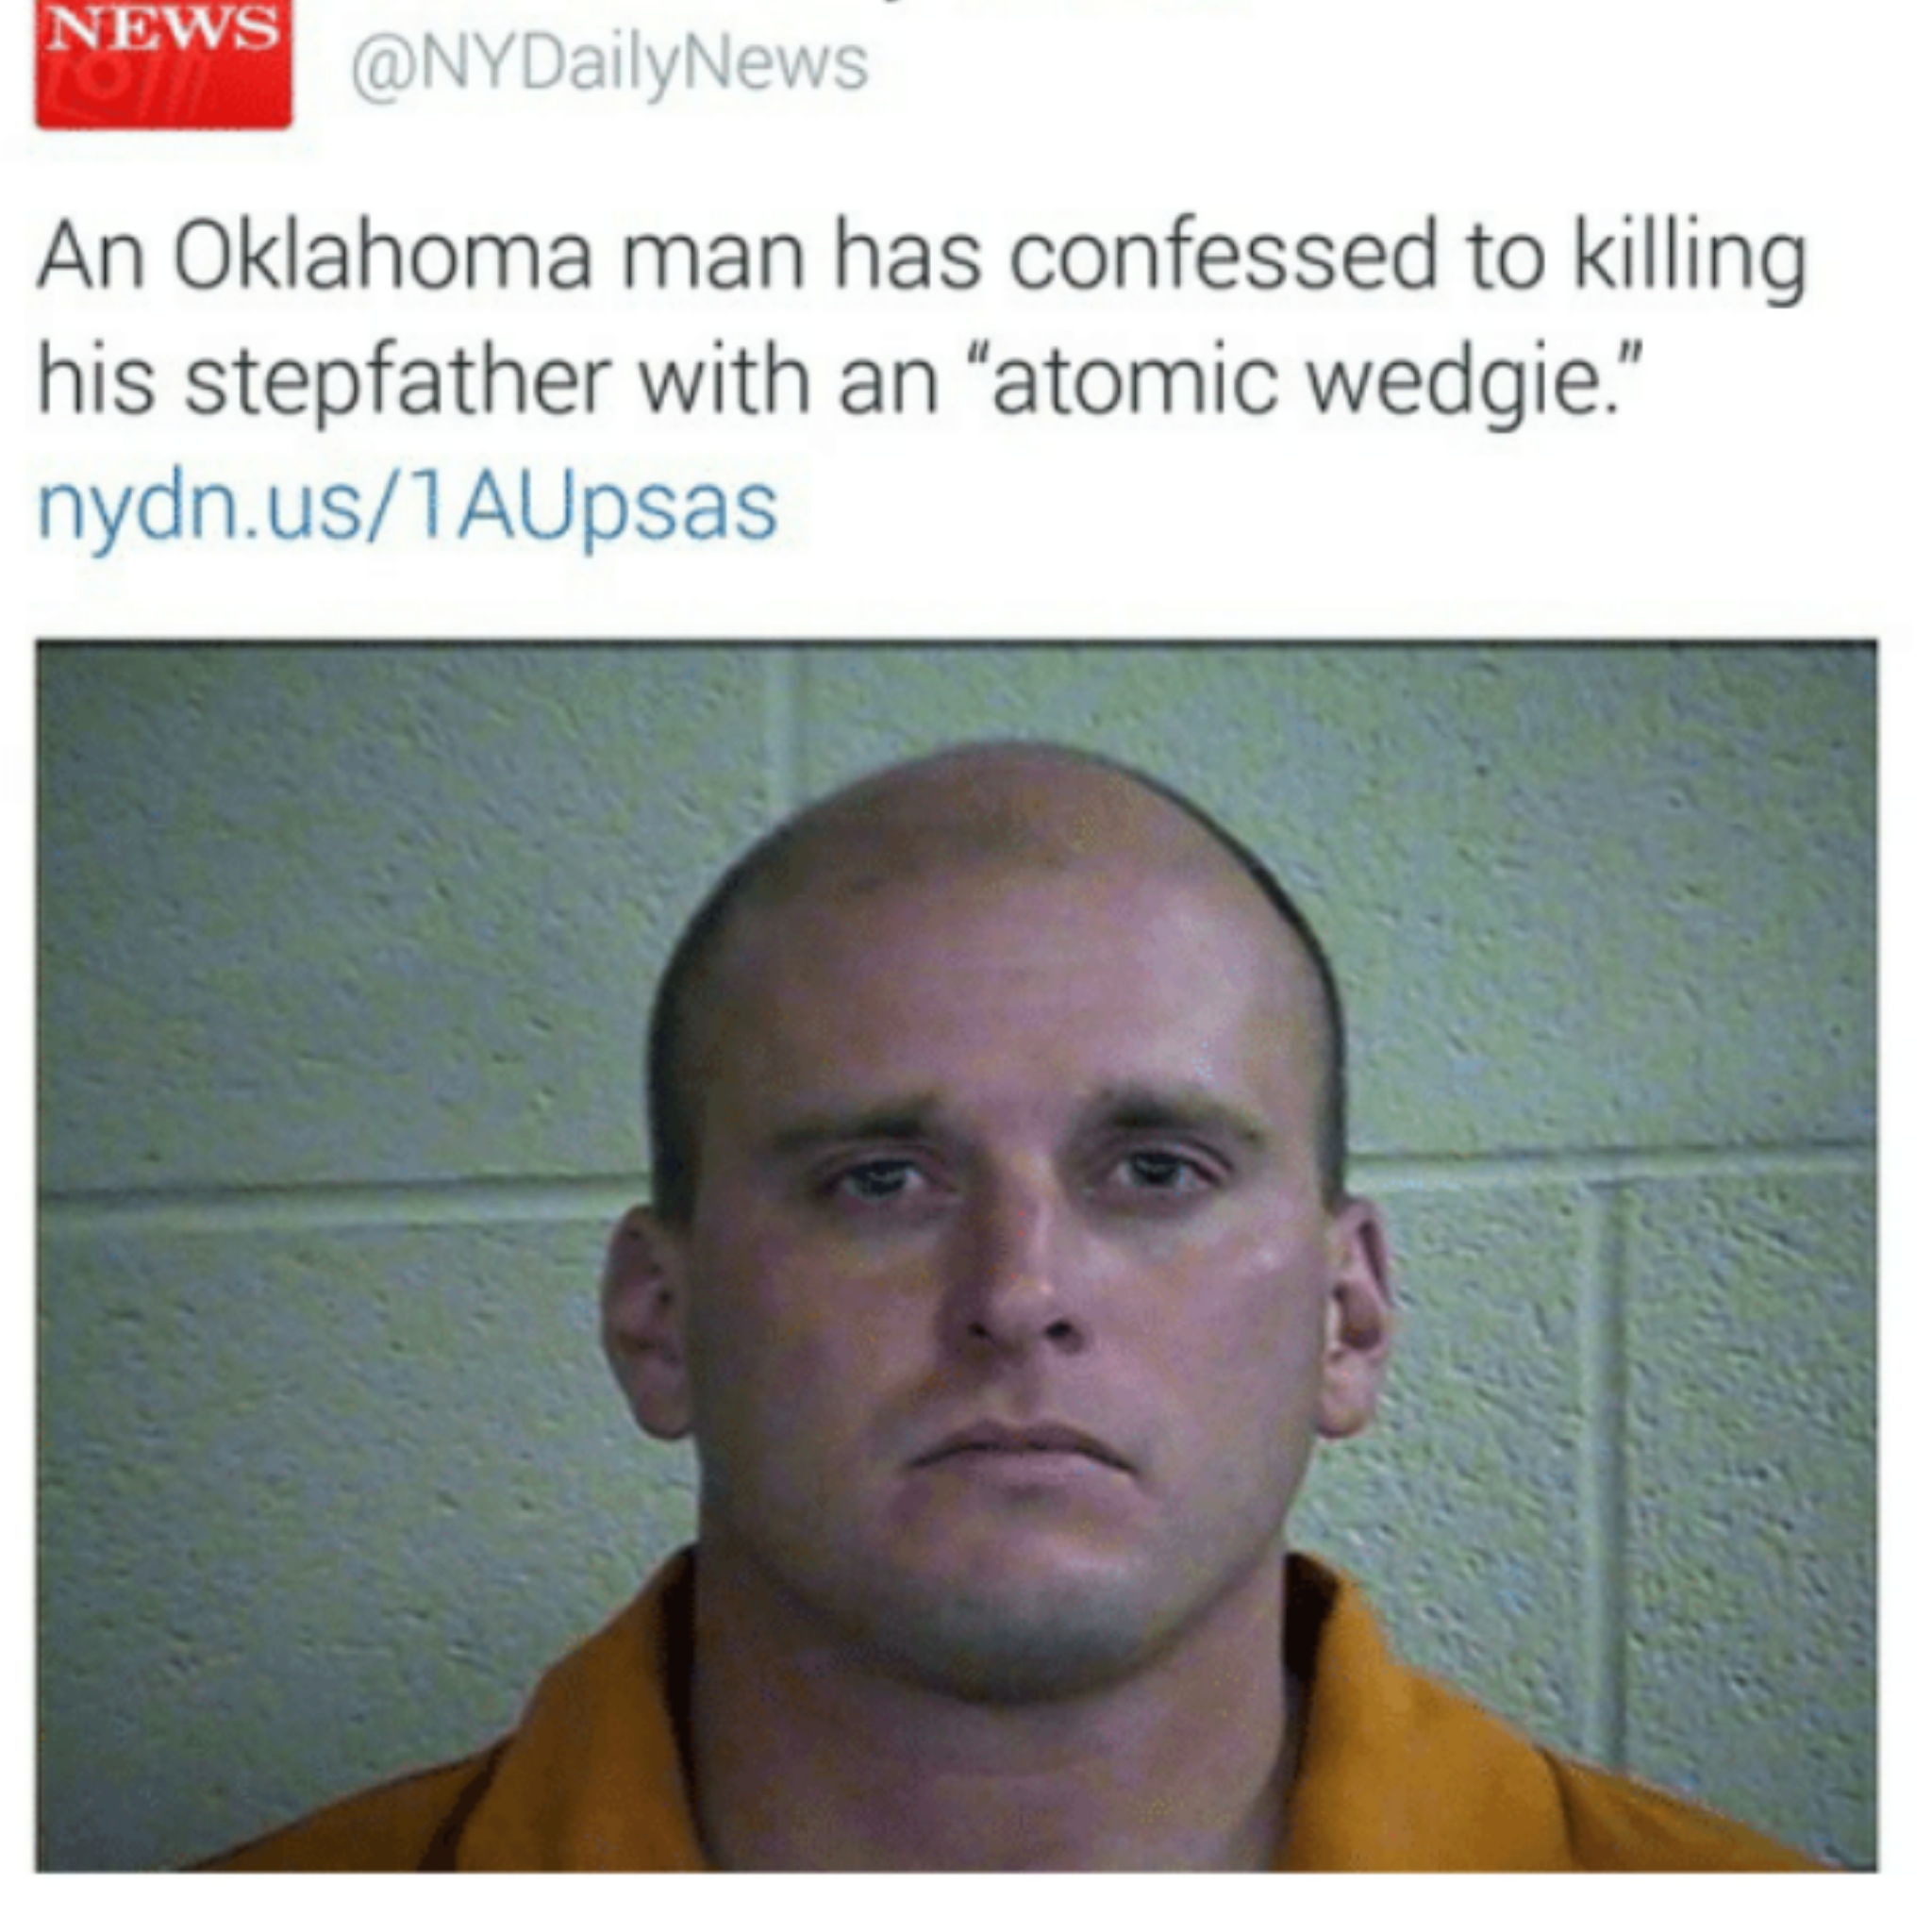 atomic wedgie death - News DailyNews An Oklahoma man has confessed to killing his stepfather with an "atomic wedgie." nydn.us1AUpsas